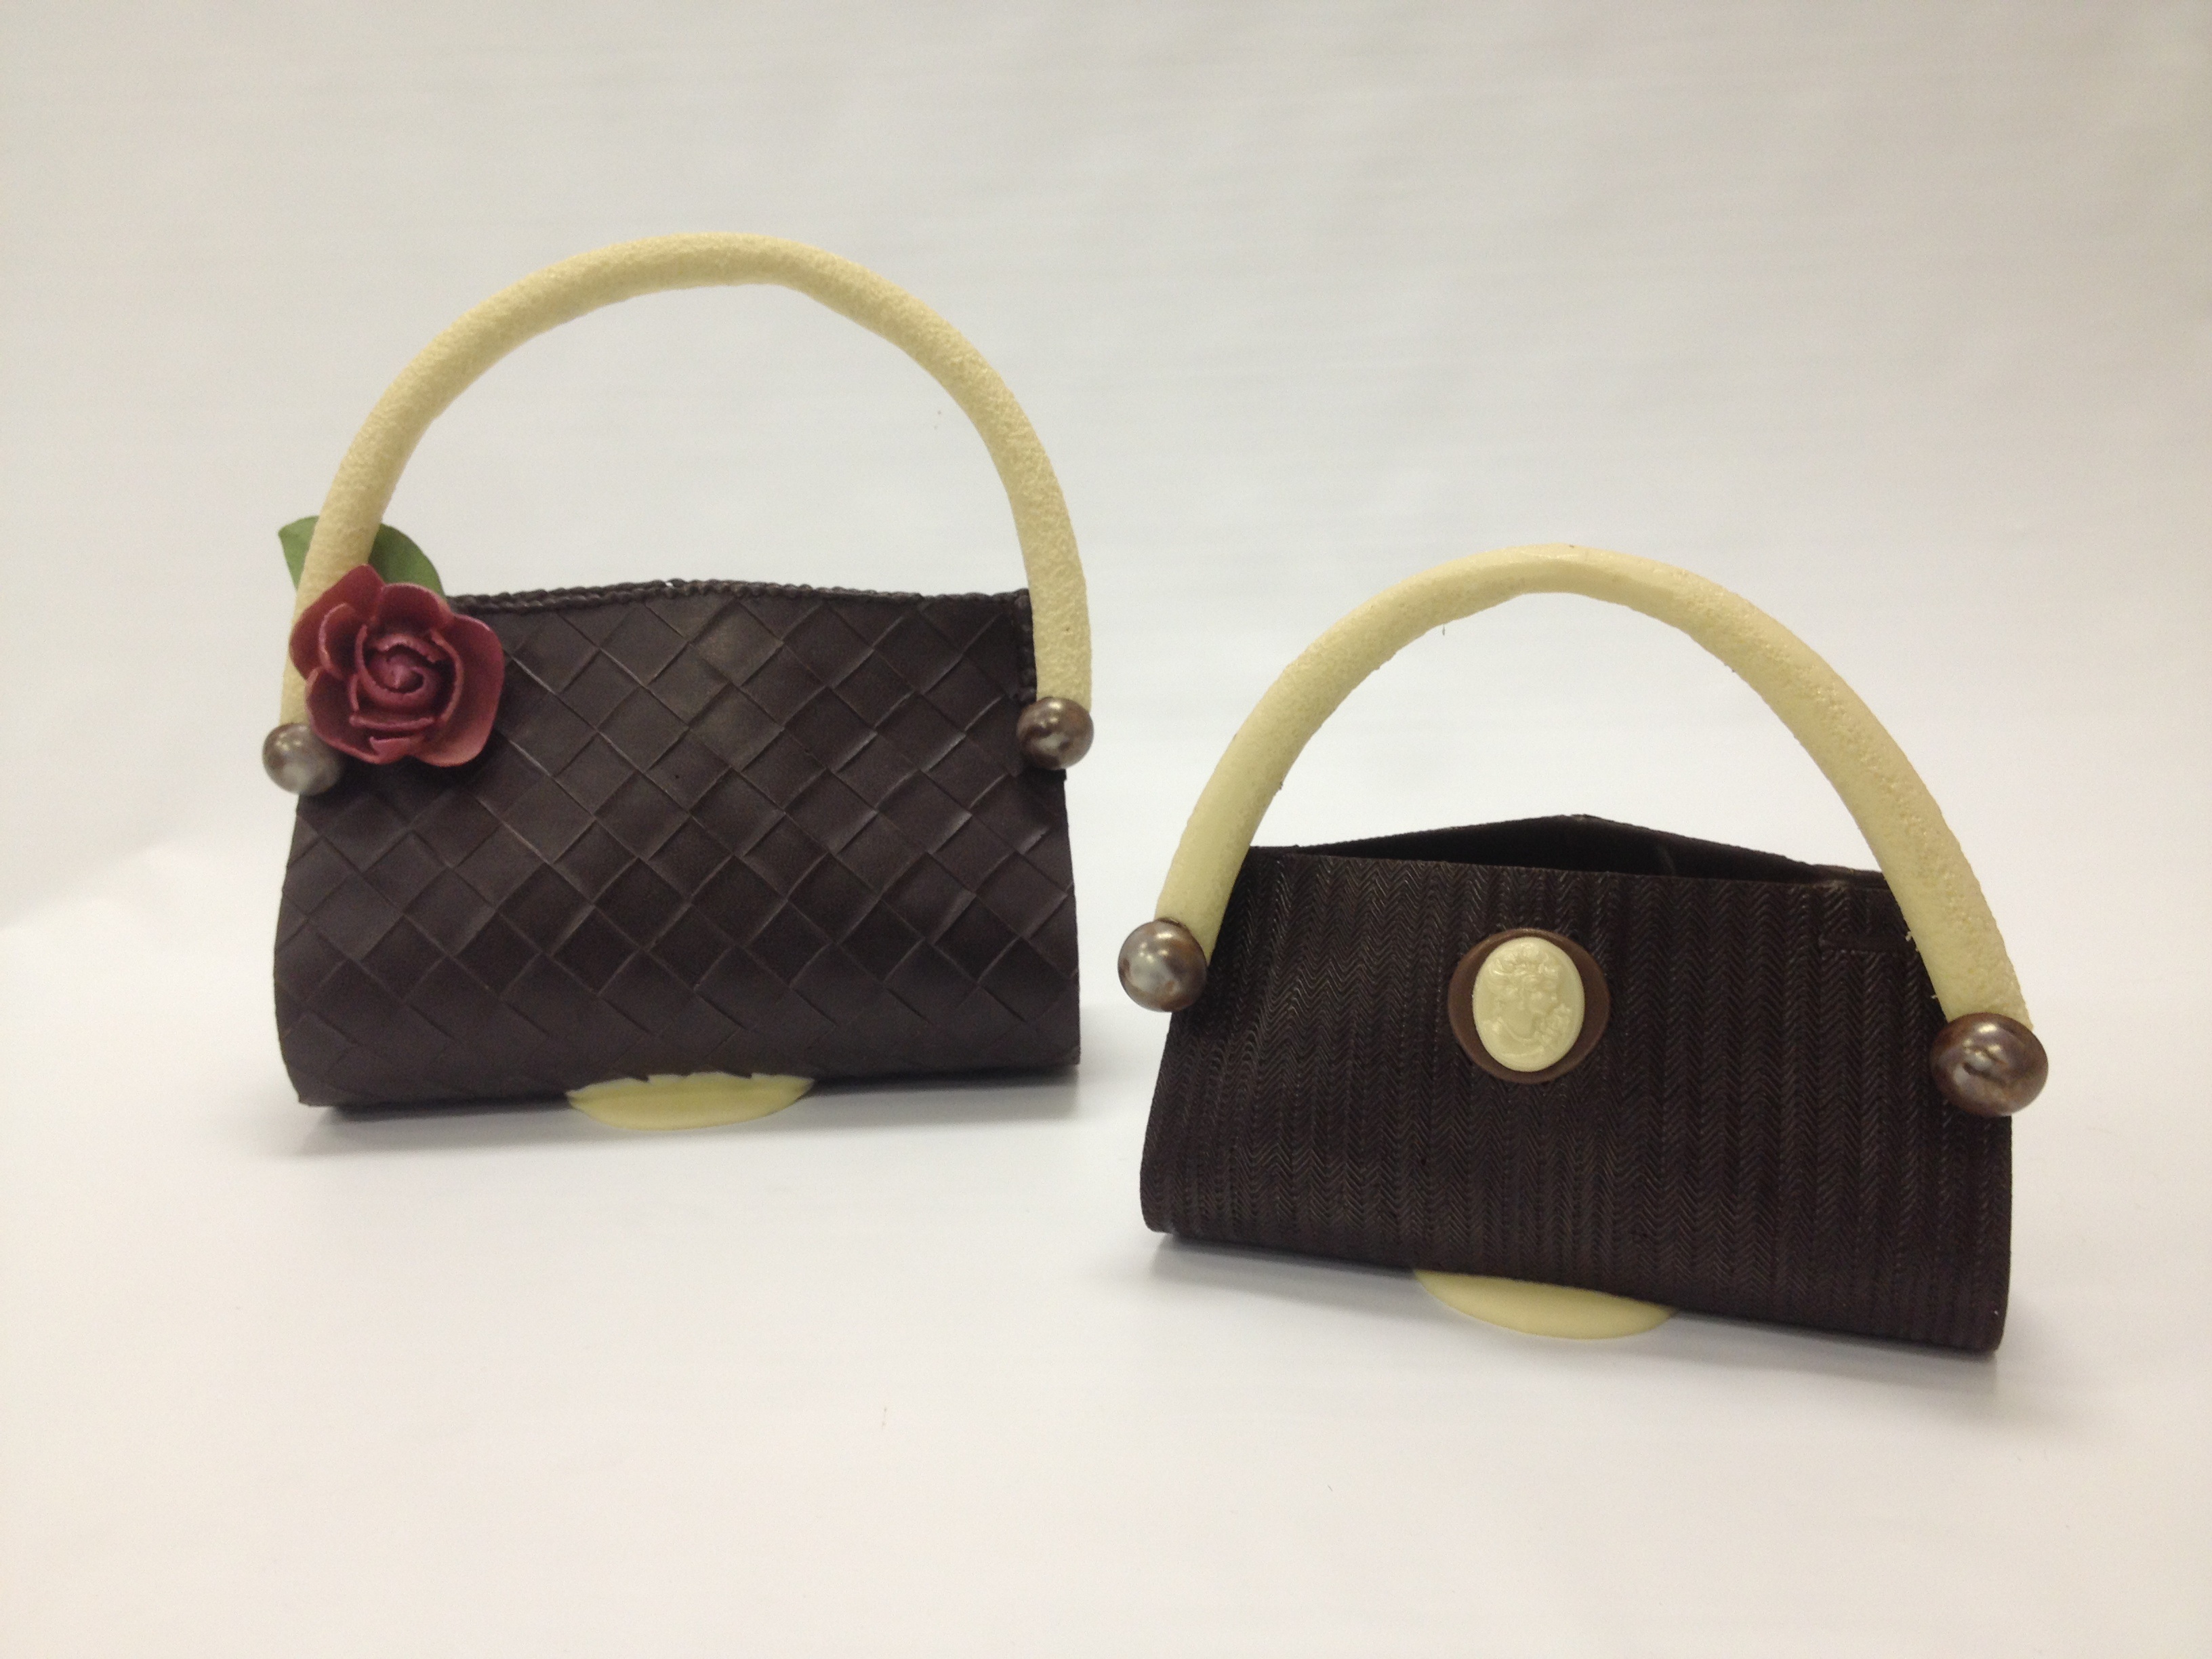 Hand Sculpted Chocolate Purses.  Yes!  They are as delicious as they are beautiful.